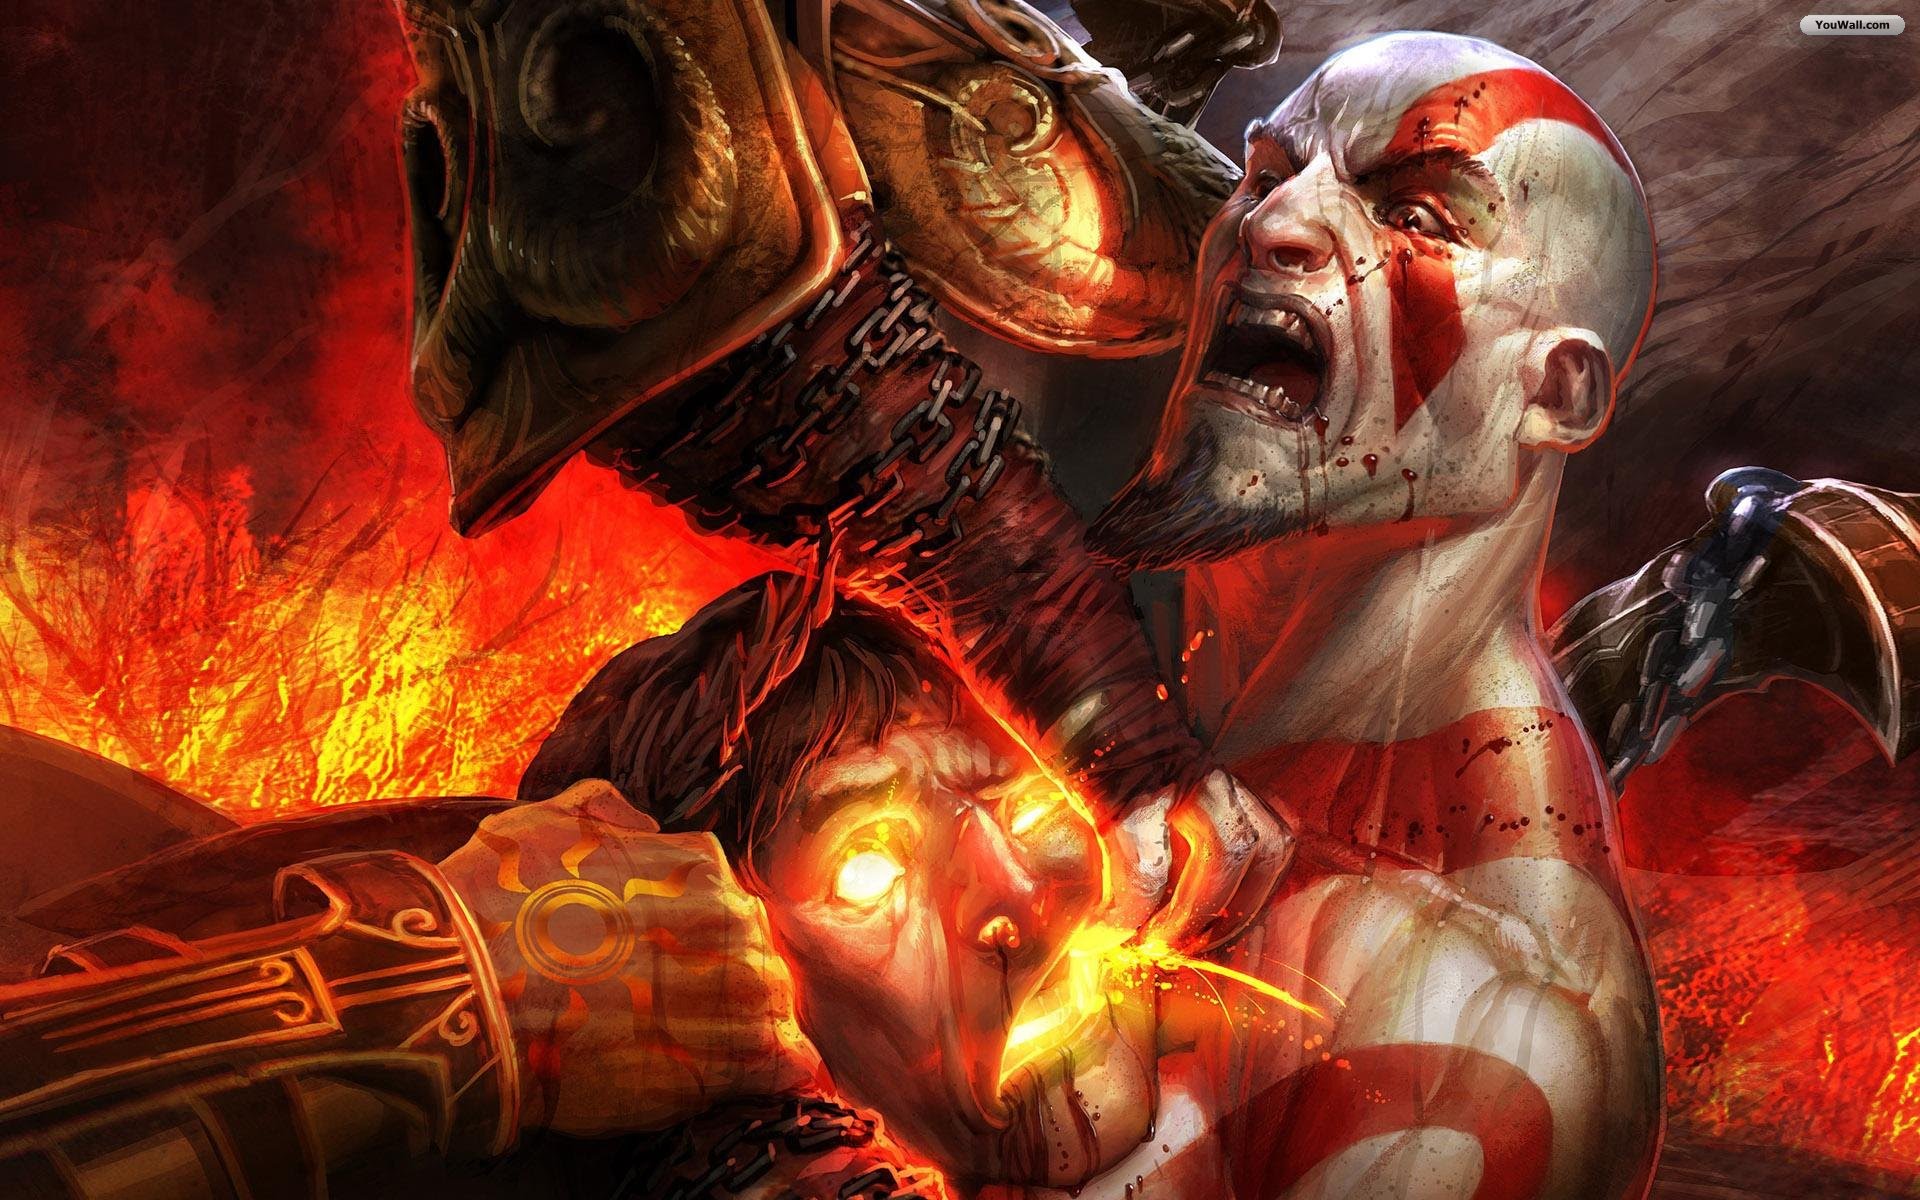 God of War III: Remastered: Vale a pena?